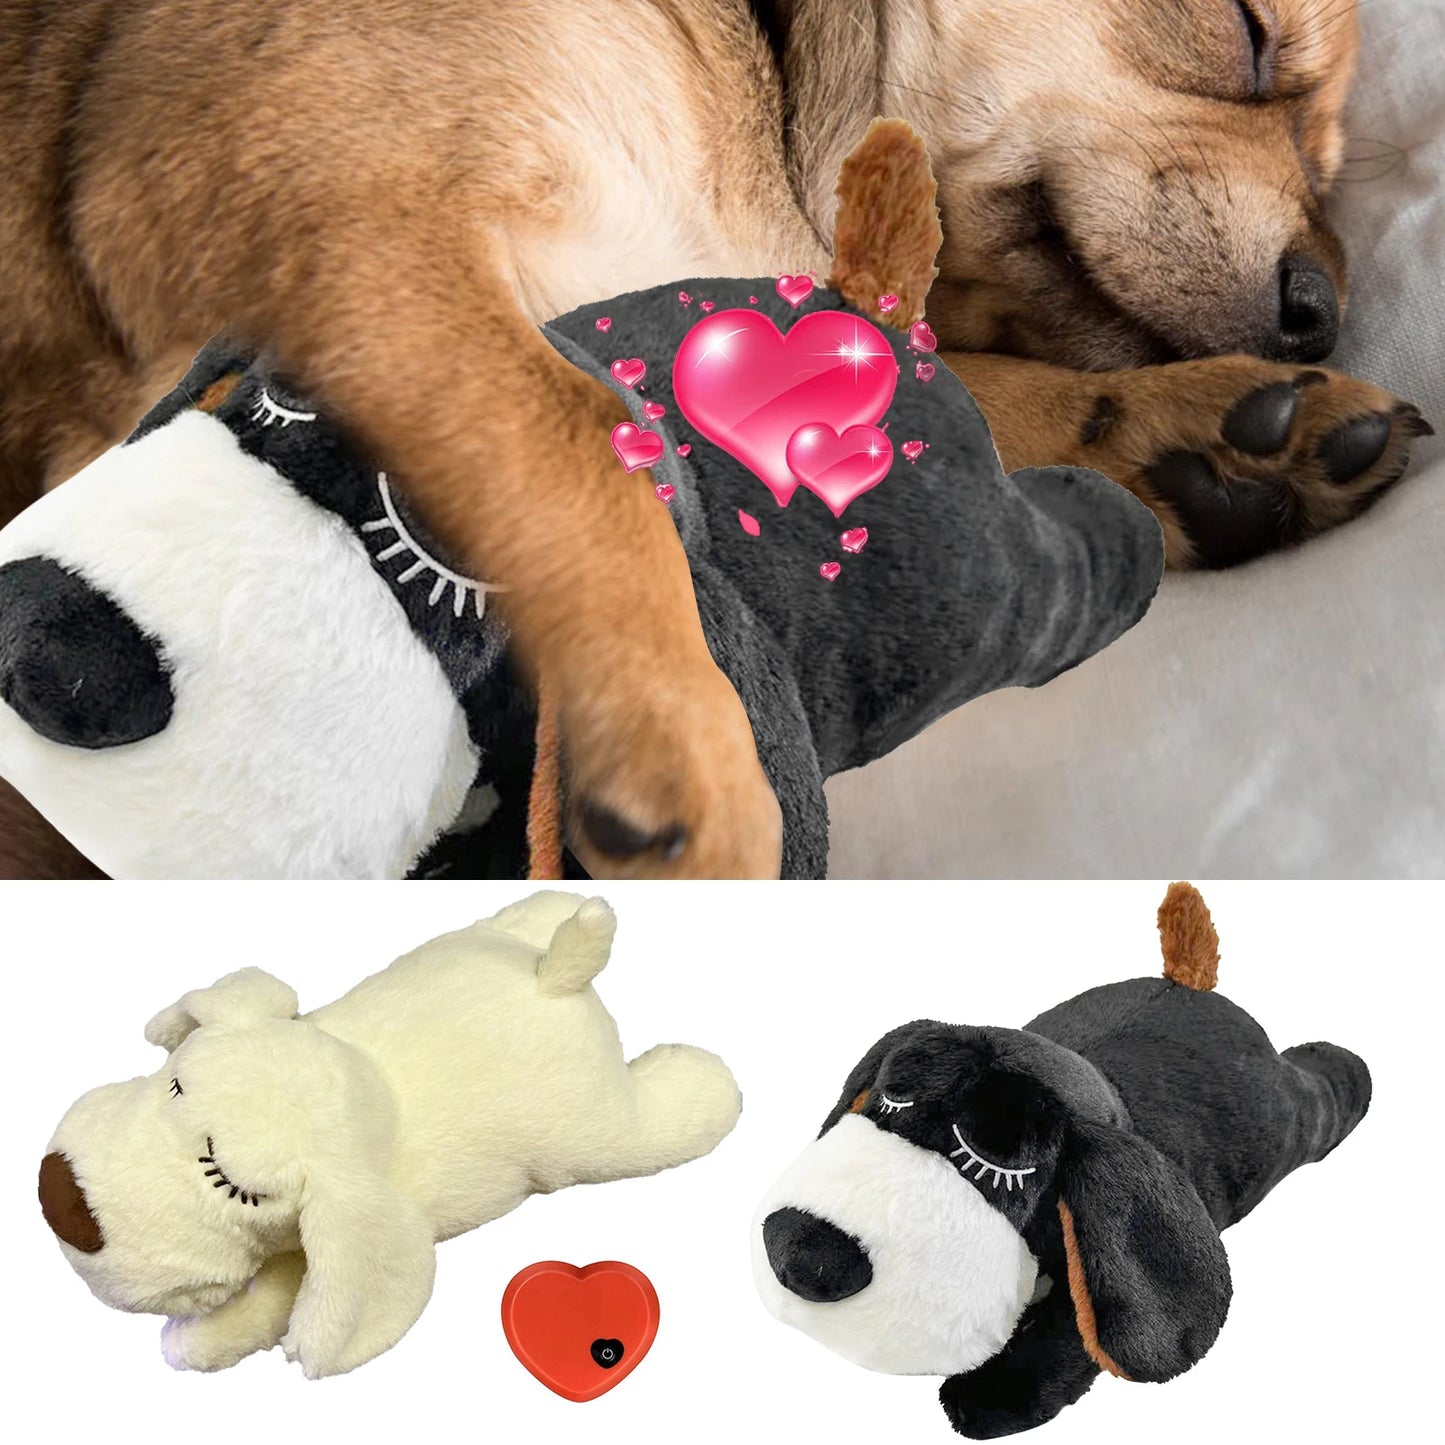 Heartbeat Comfort Plush Dog Toy | Soft Fabric Loneliness Relief Companion | Suitable for New Pets & Puppies | Two Modes Heartbeat Simulation ShopOnlyDeal